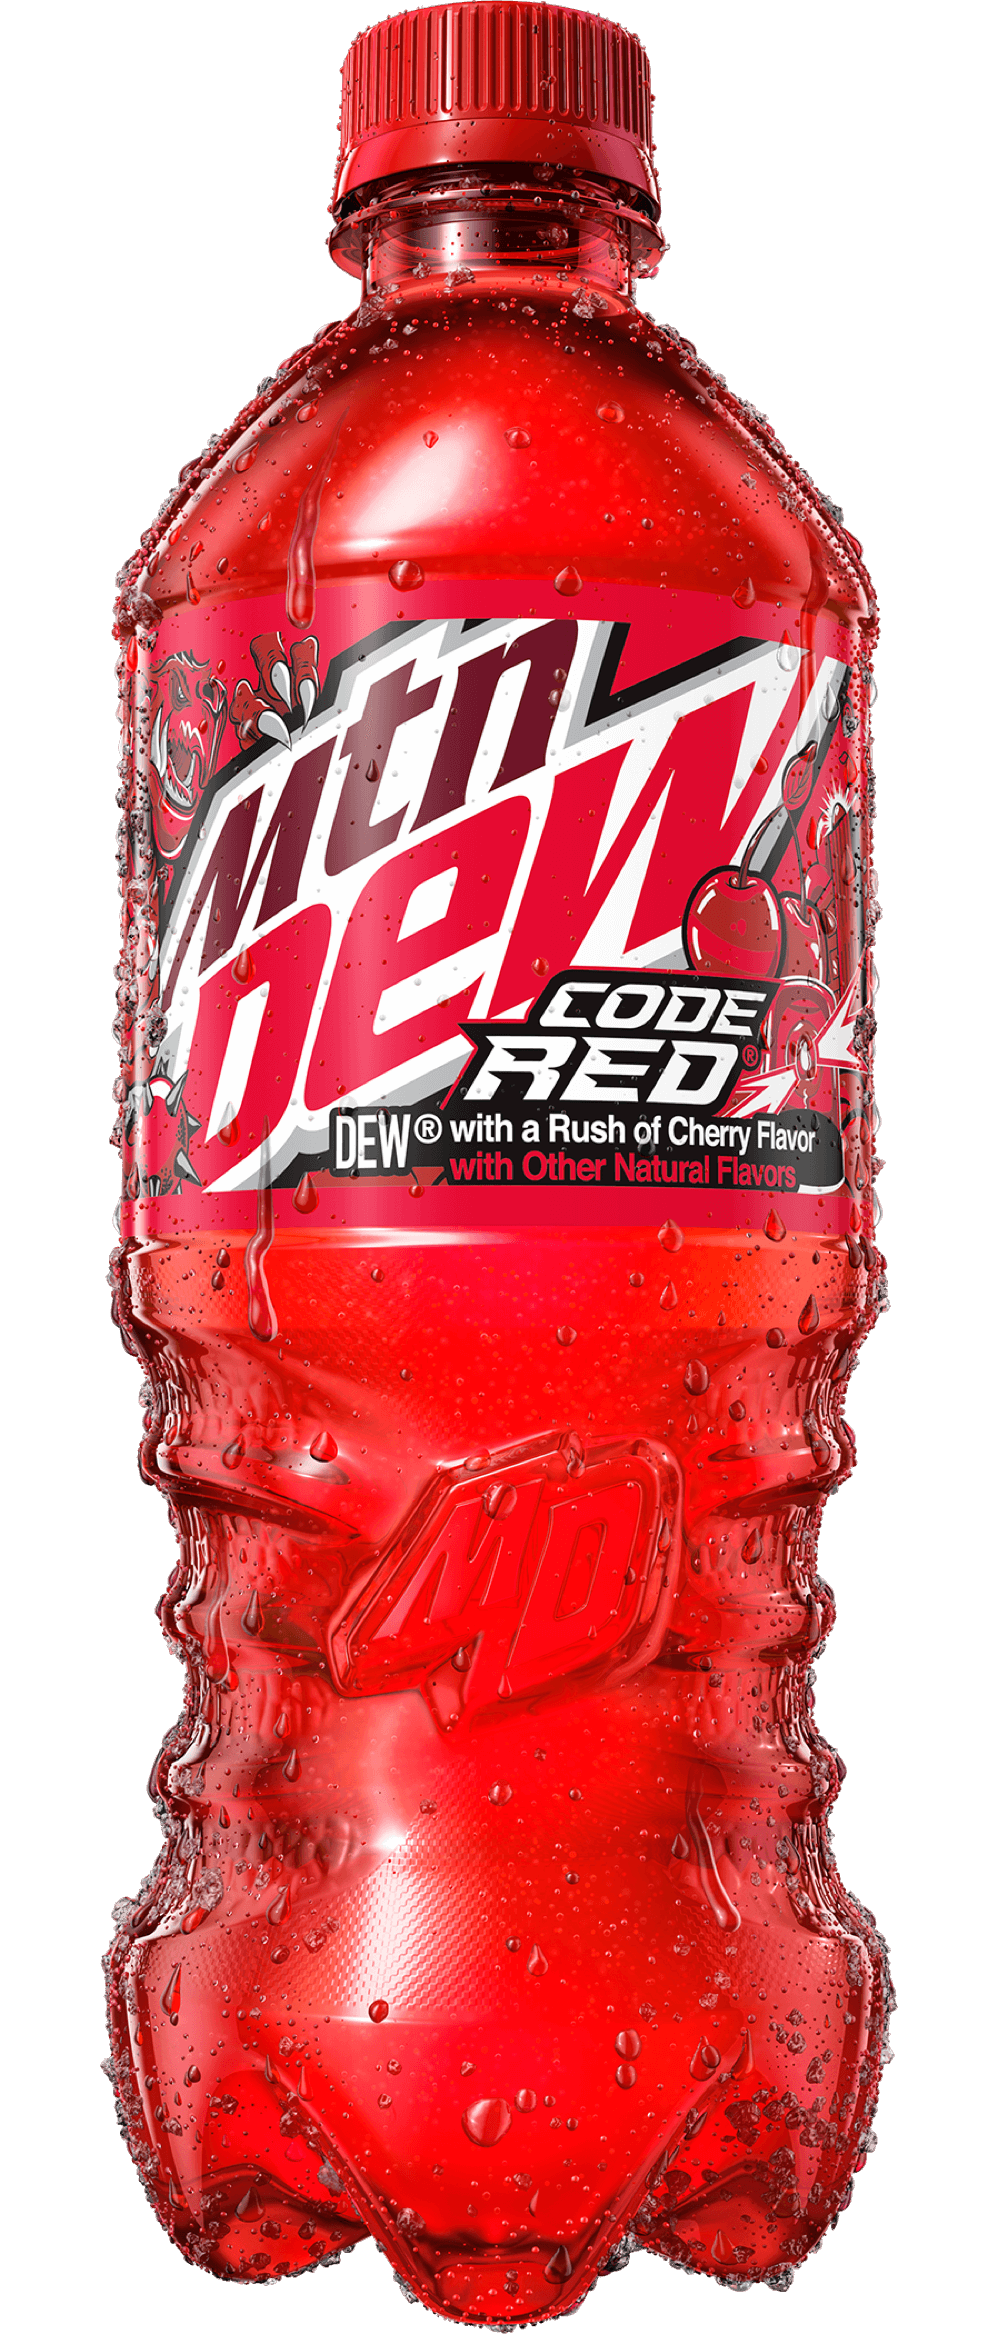 High Quality Mountain dew code red Blank Meme Template